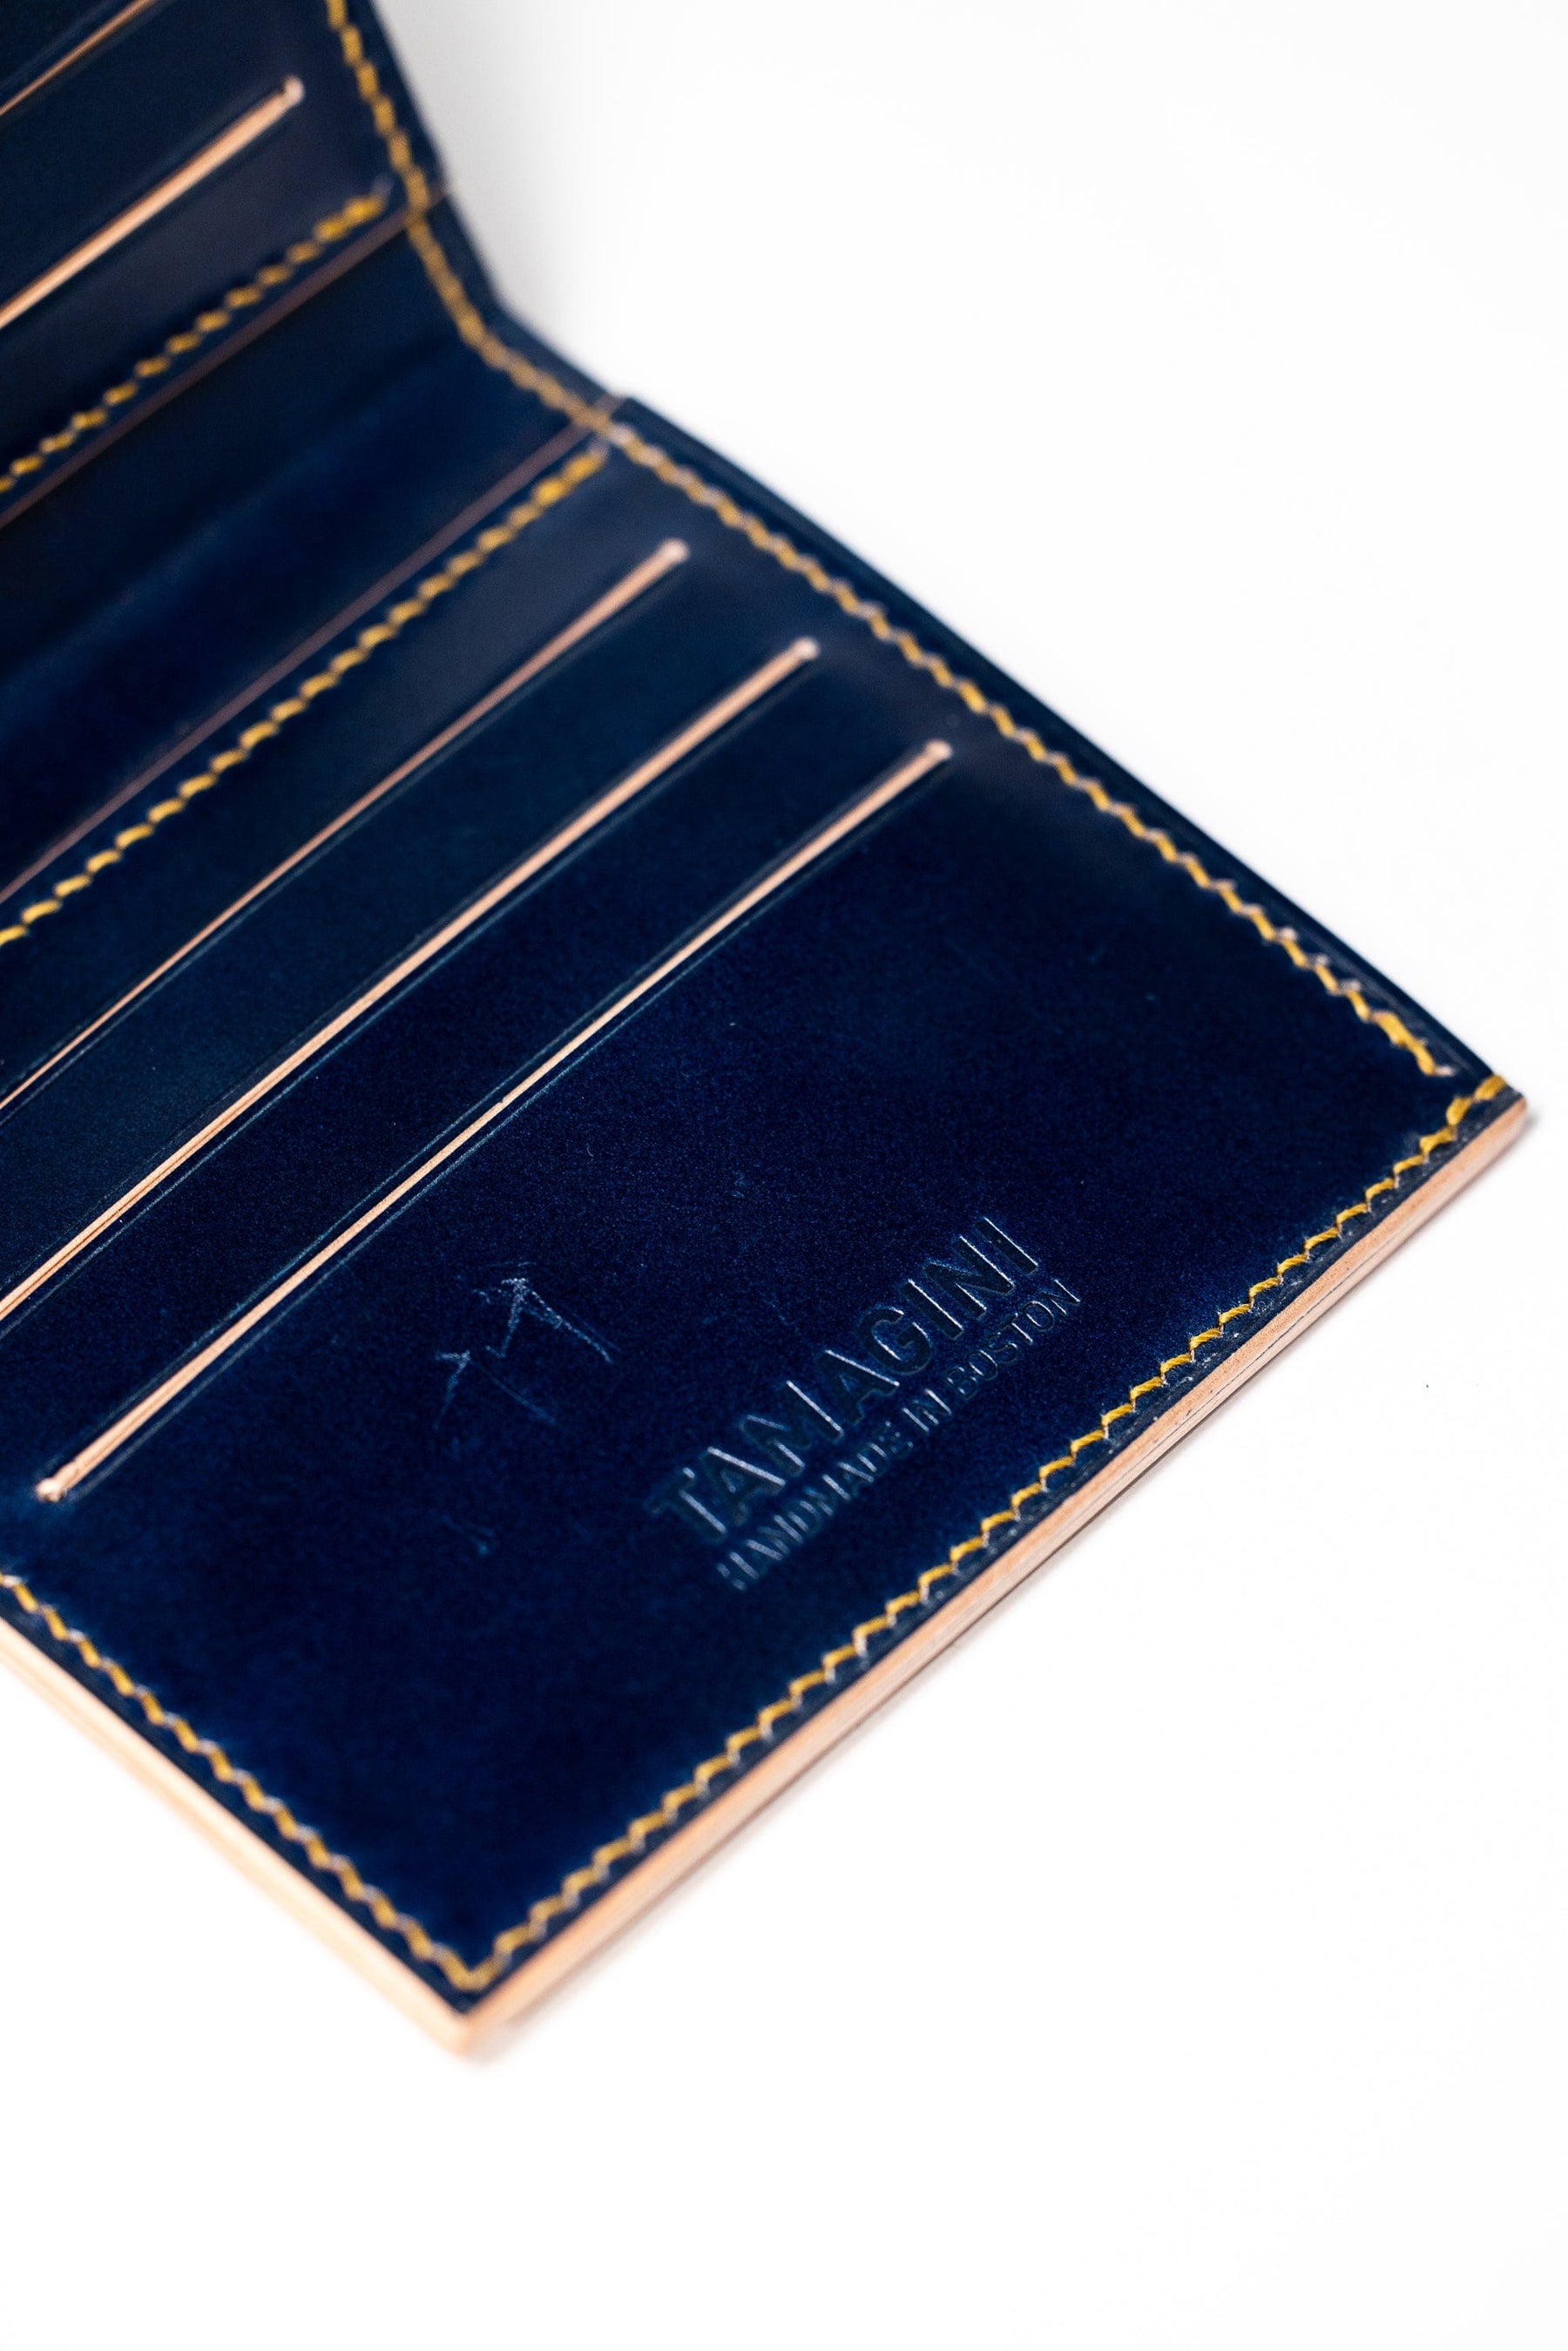 SAMPLE The Tremont Wallet - Deep Blue Shell Cordovan